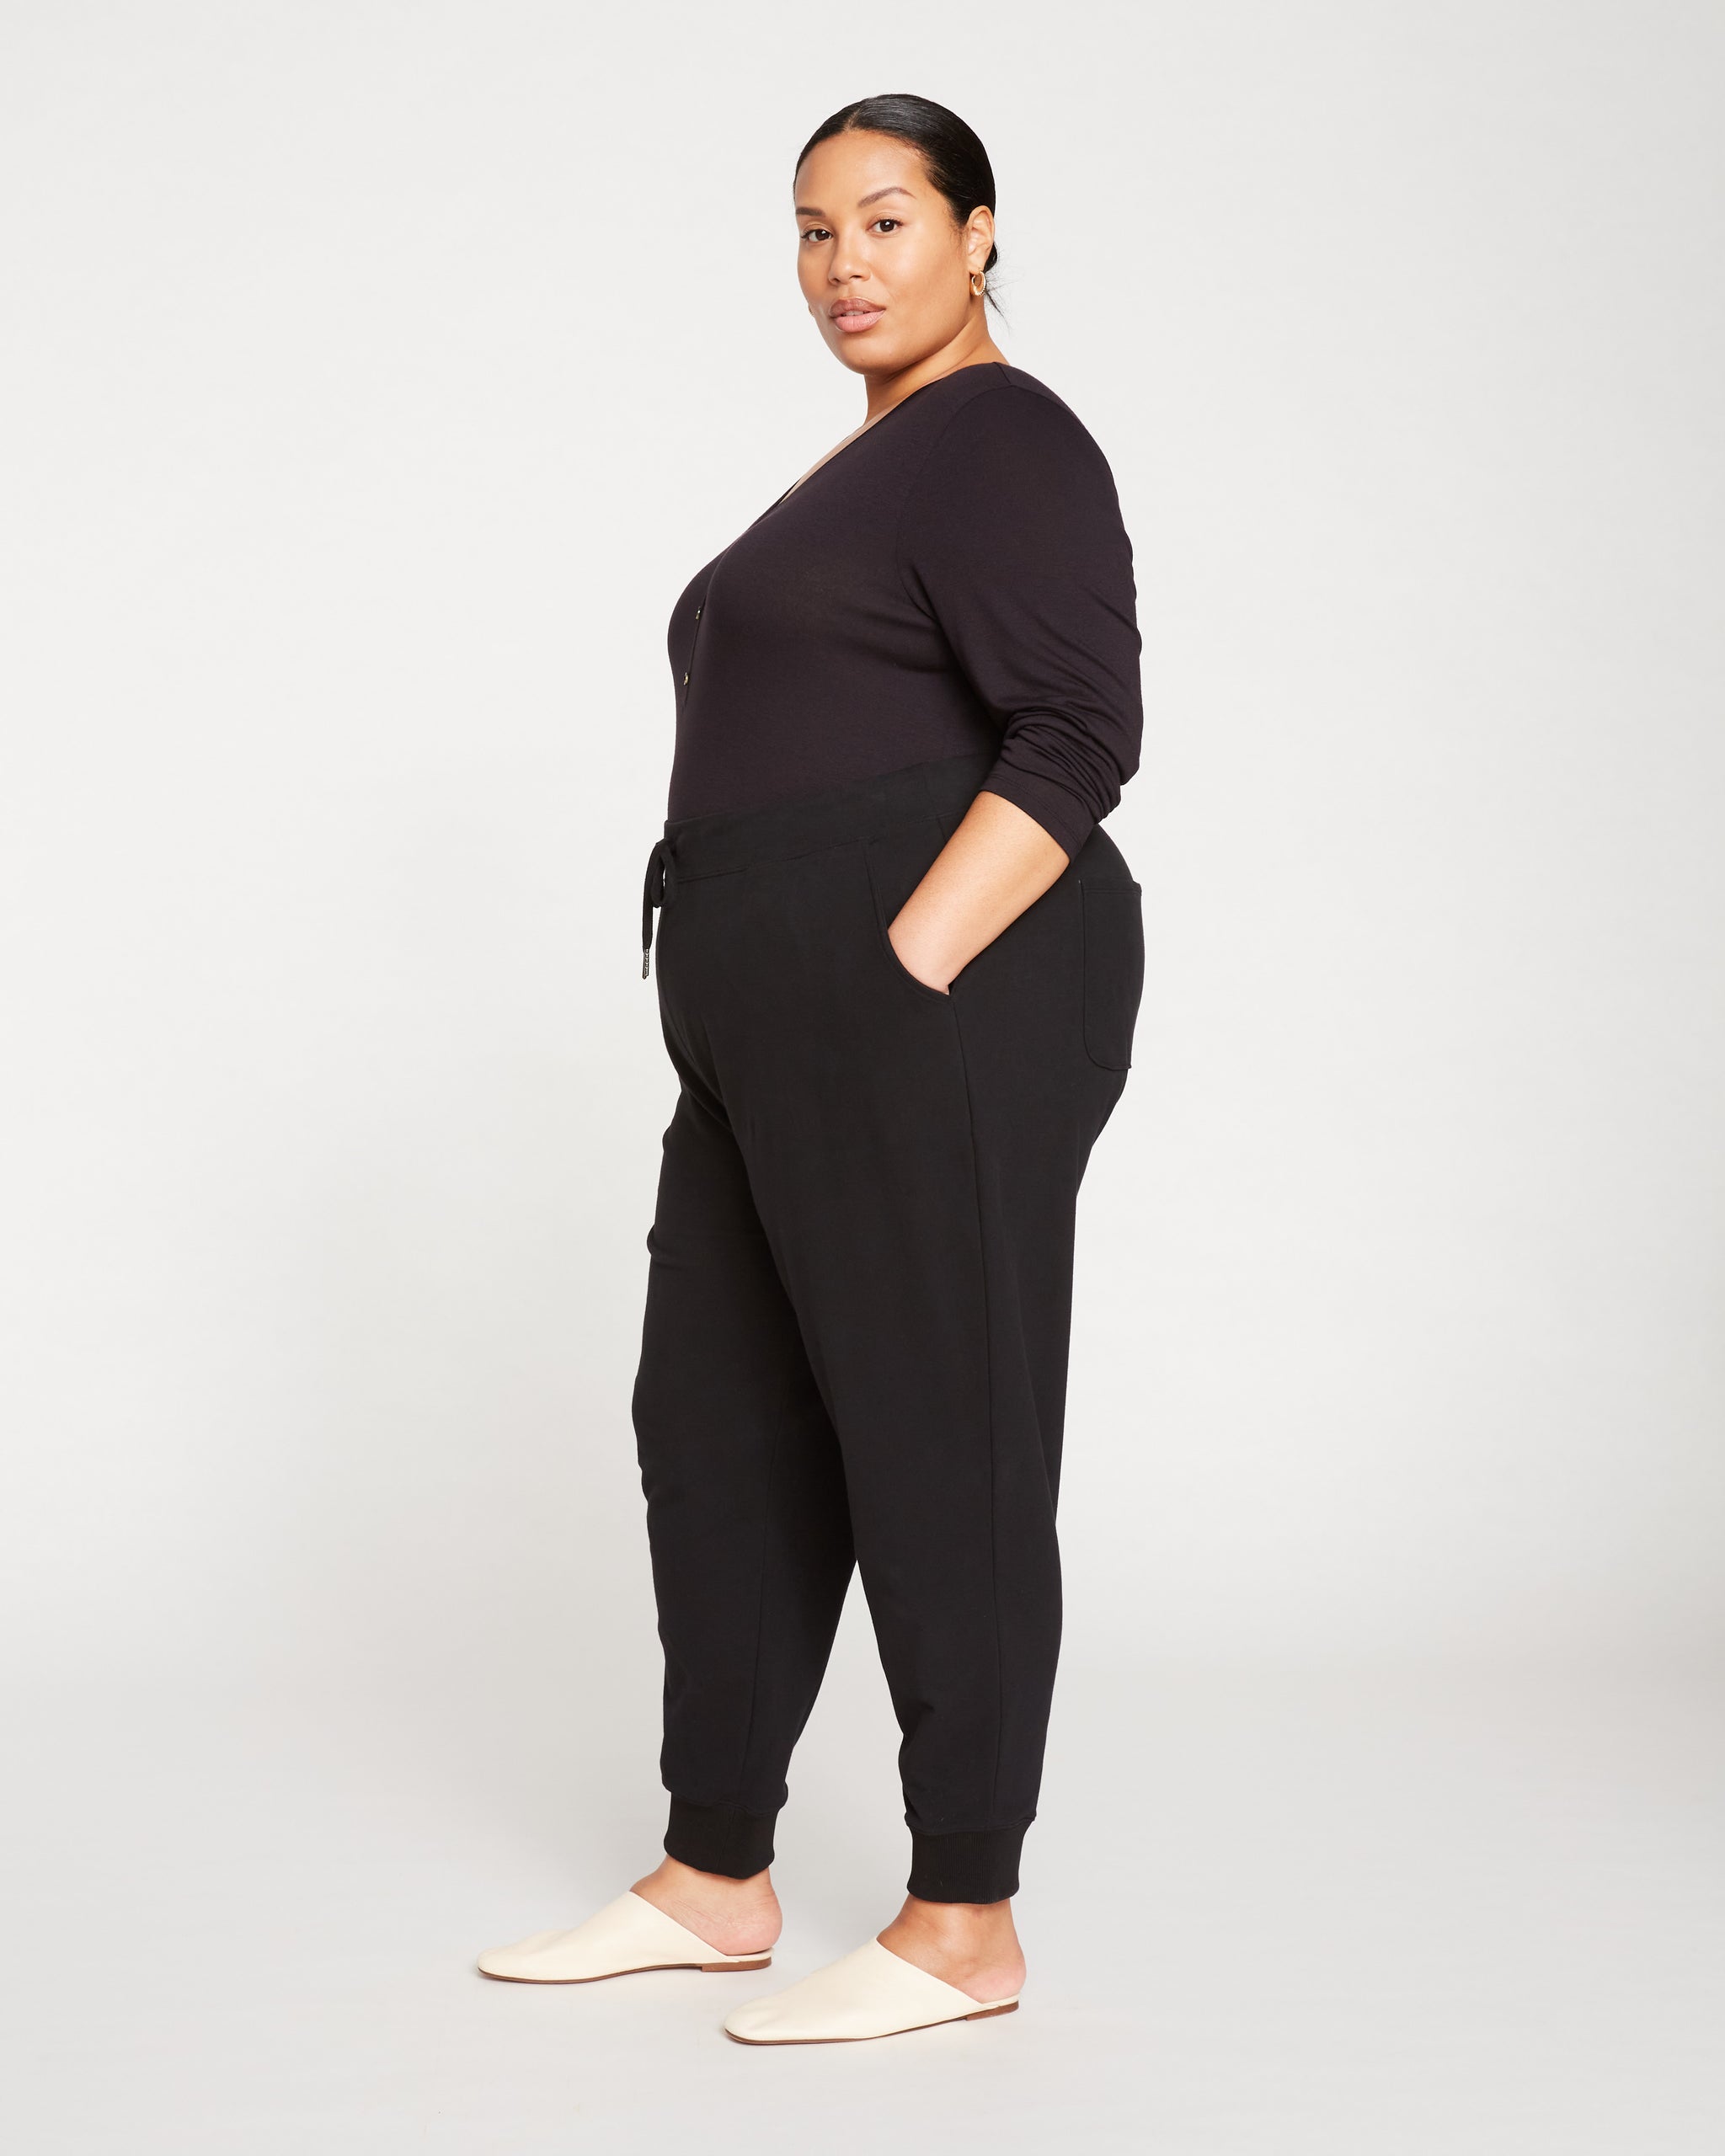 Universal Standard Women's Heather Brushed Terry Drawstring Jogger Pants in Black Size 6-8